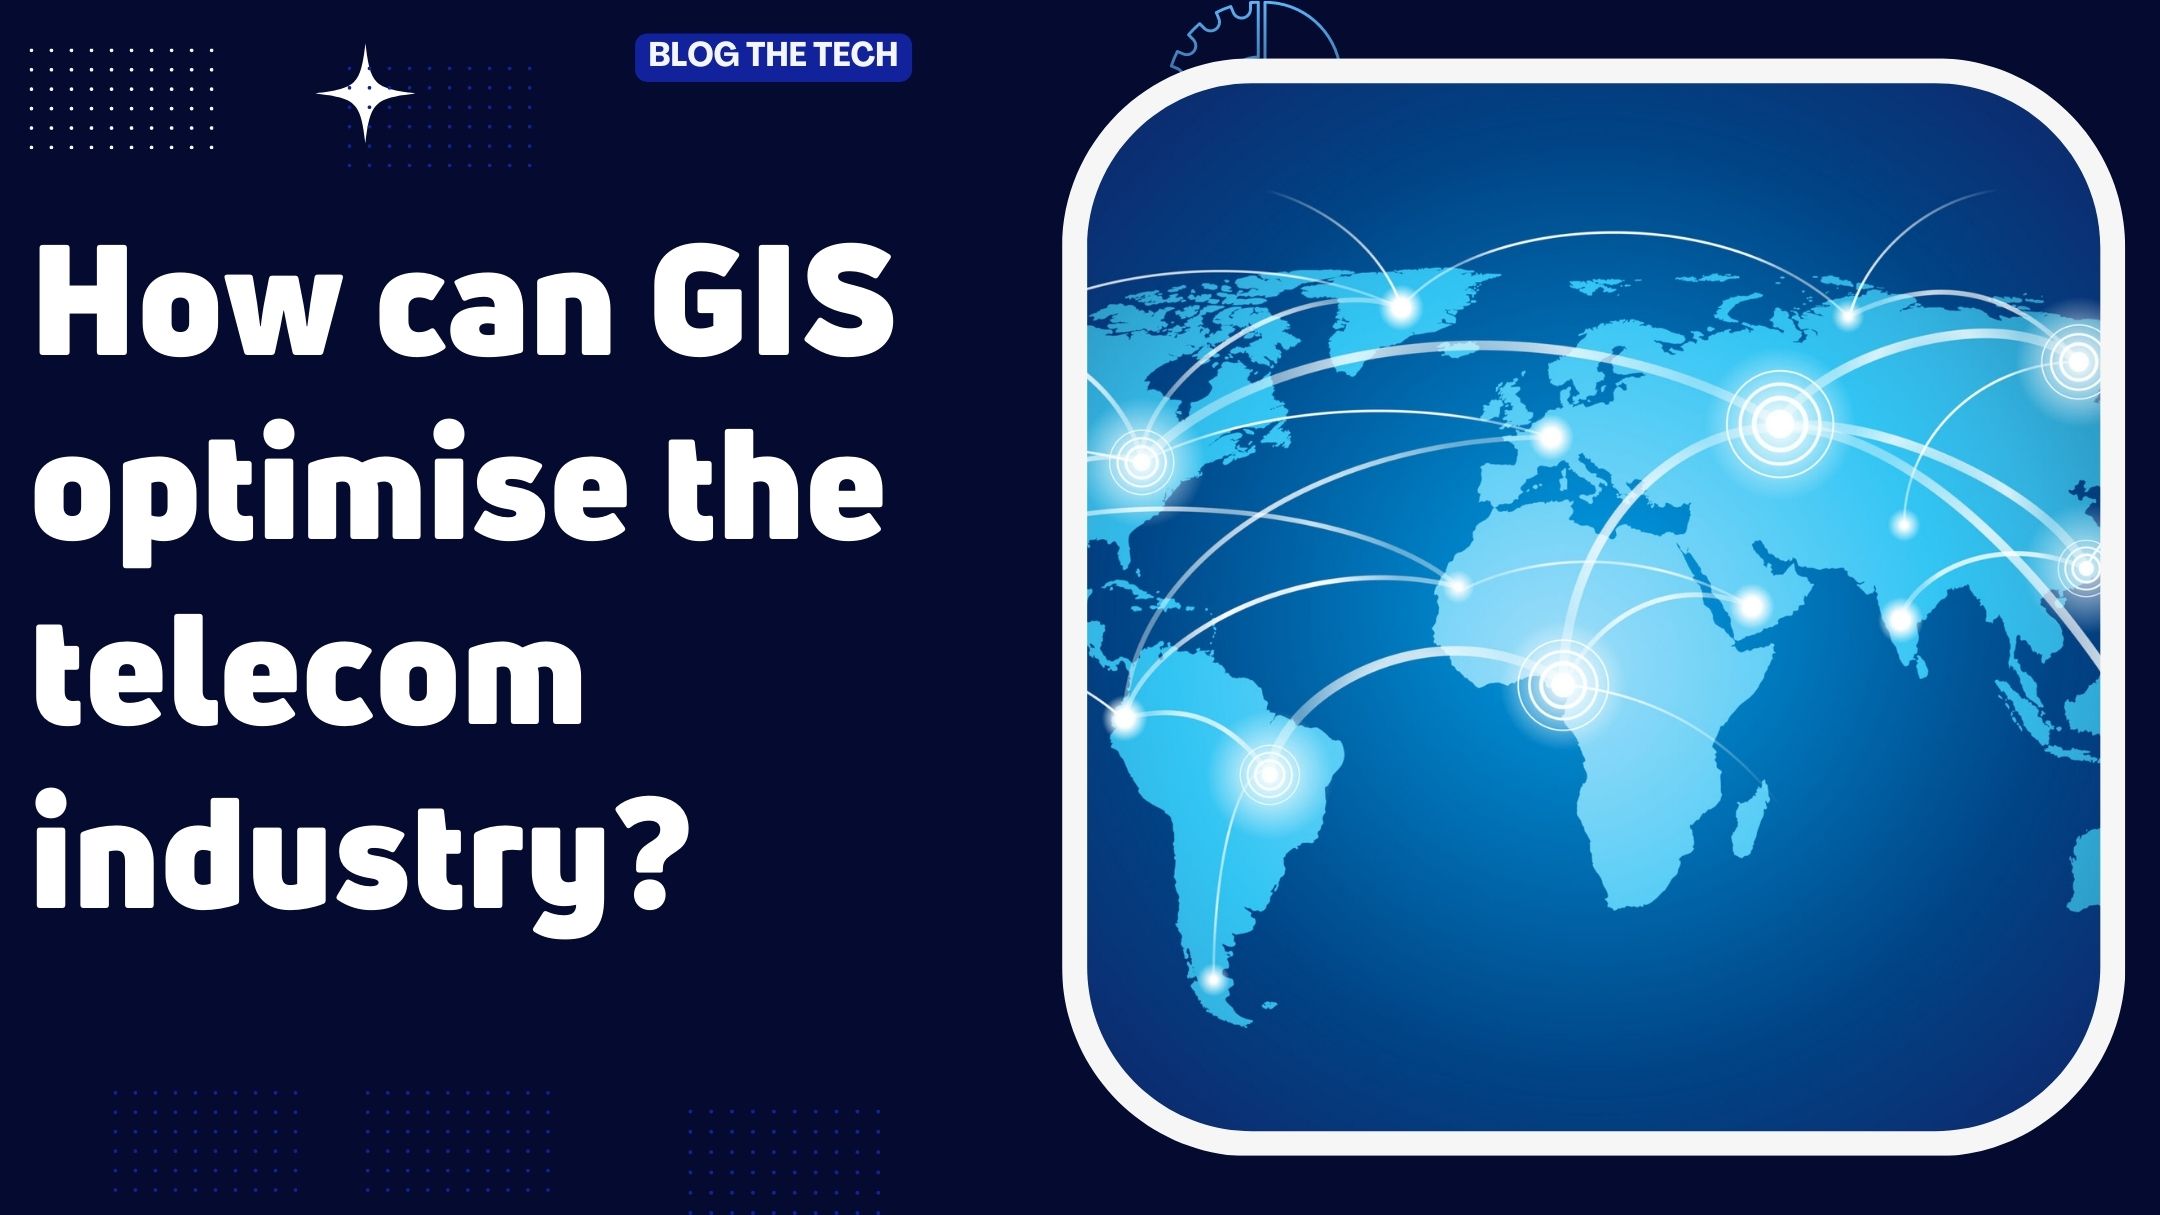 How can GIS optimise the telecom industry?